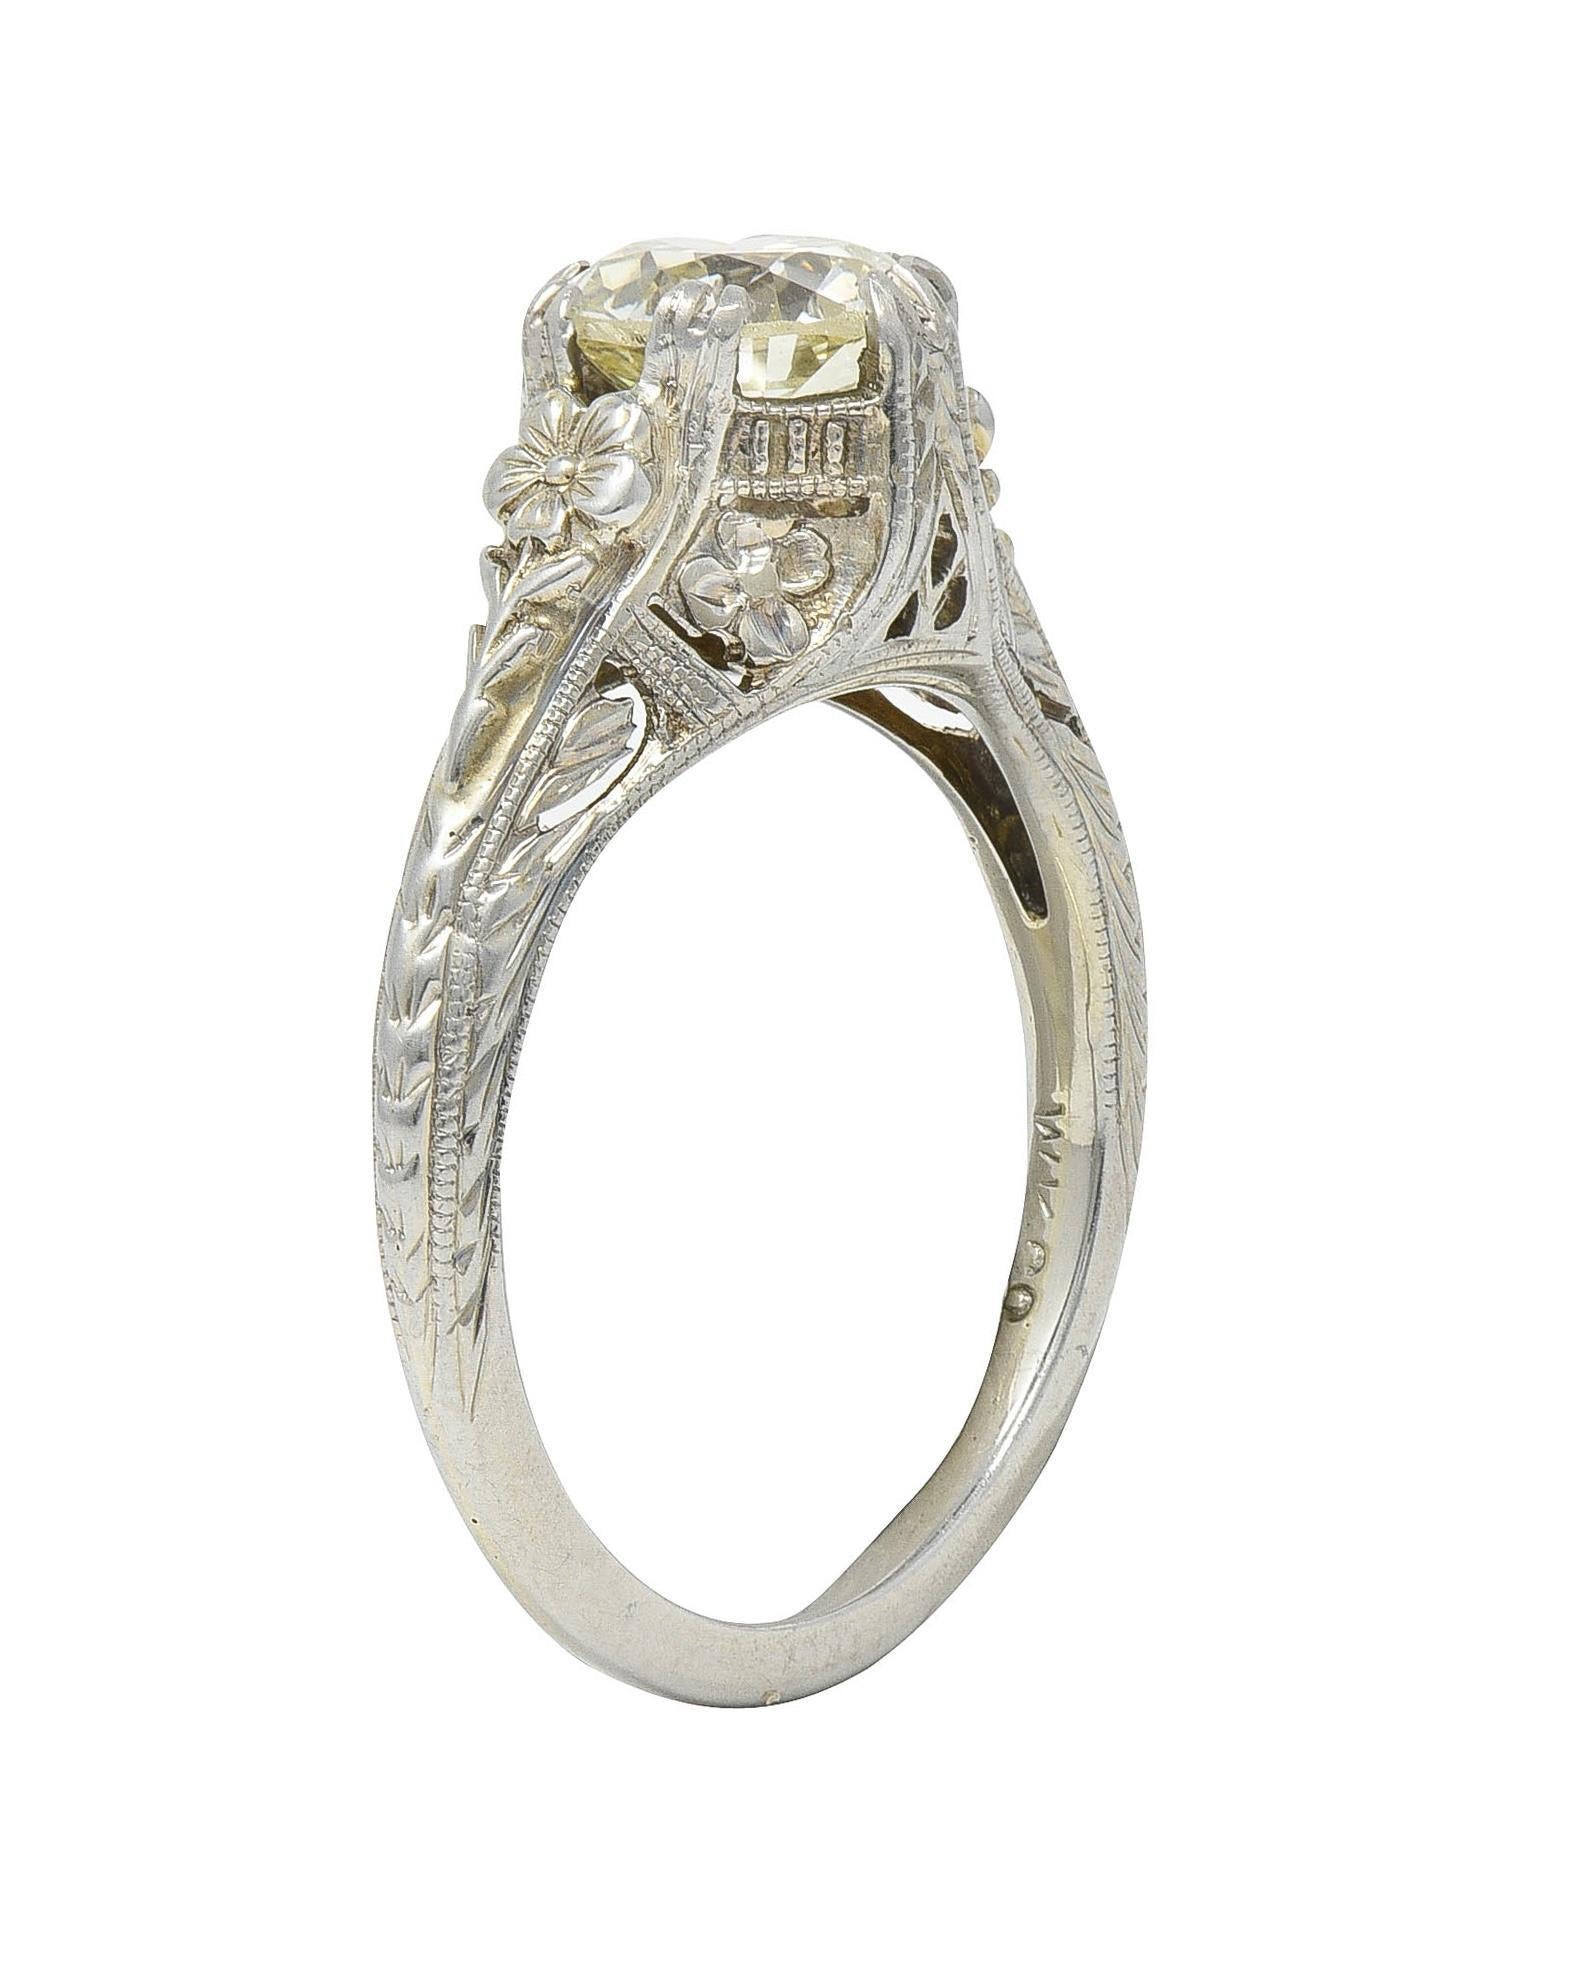 Centering an old European cut diamond weighing 1.31 carats - Q-R color with VS clarity
Set with split prongs with an ornately decorated and pierced gallery 
Featuring raised orange blossom motifs and wheat motif engraving
Accented by grooved details